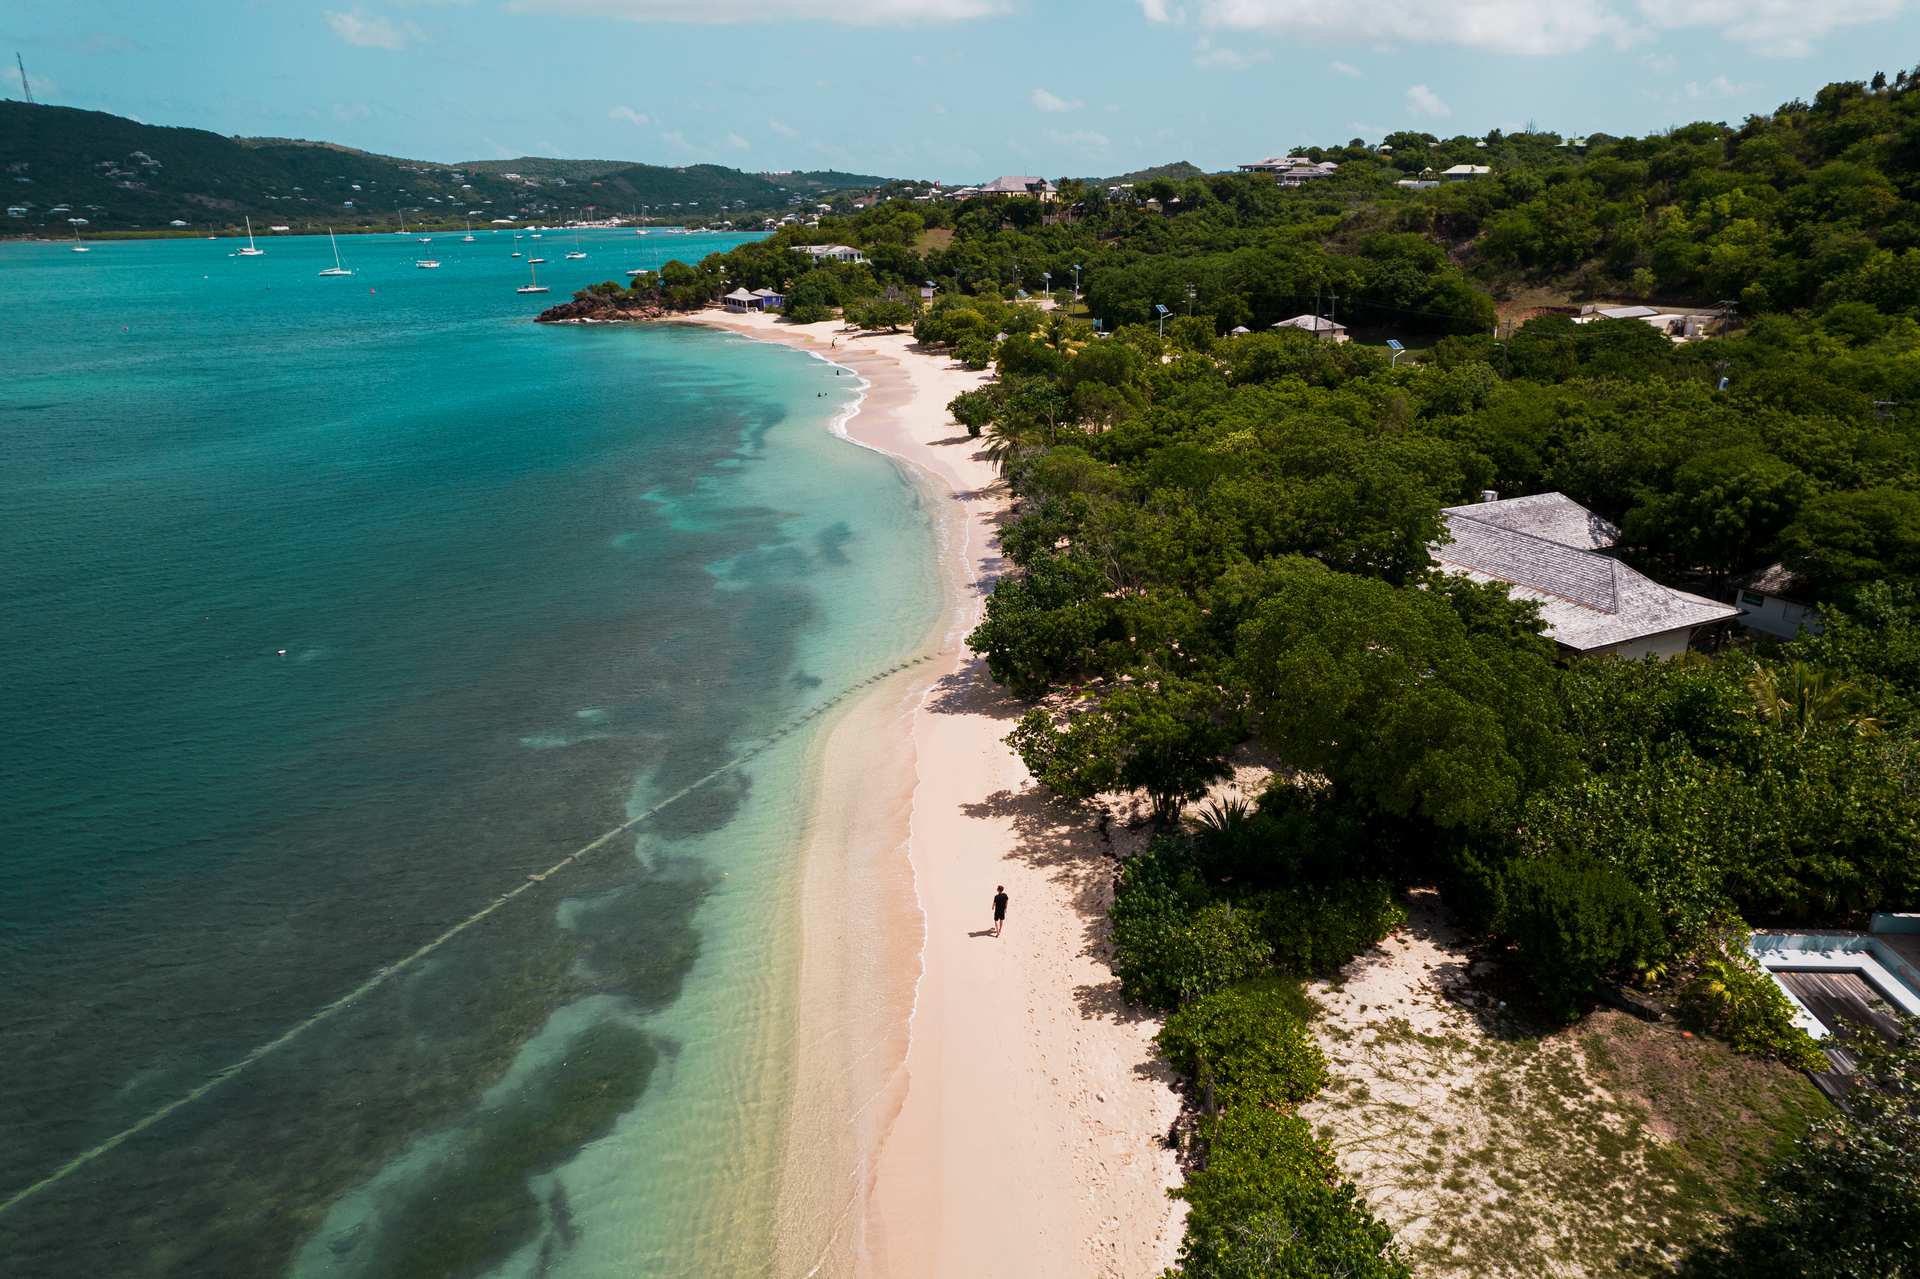 Aerial view of the sea, beach, sandtrees and the island on a sunny day in Antigua. 2021, end of year reflection post